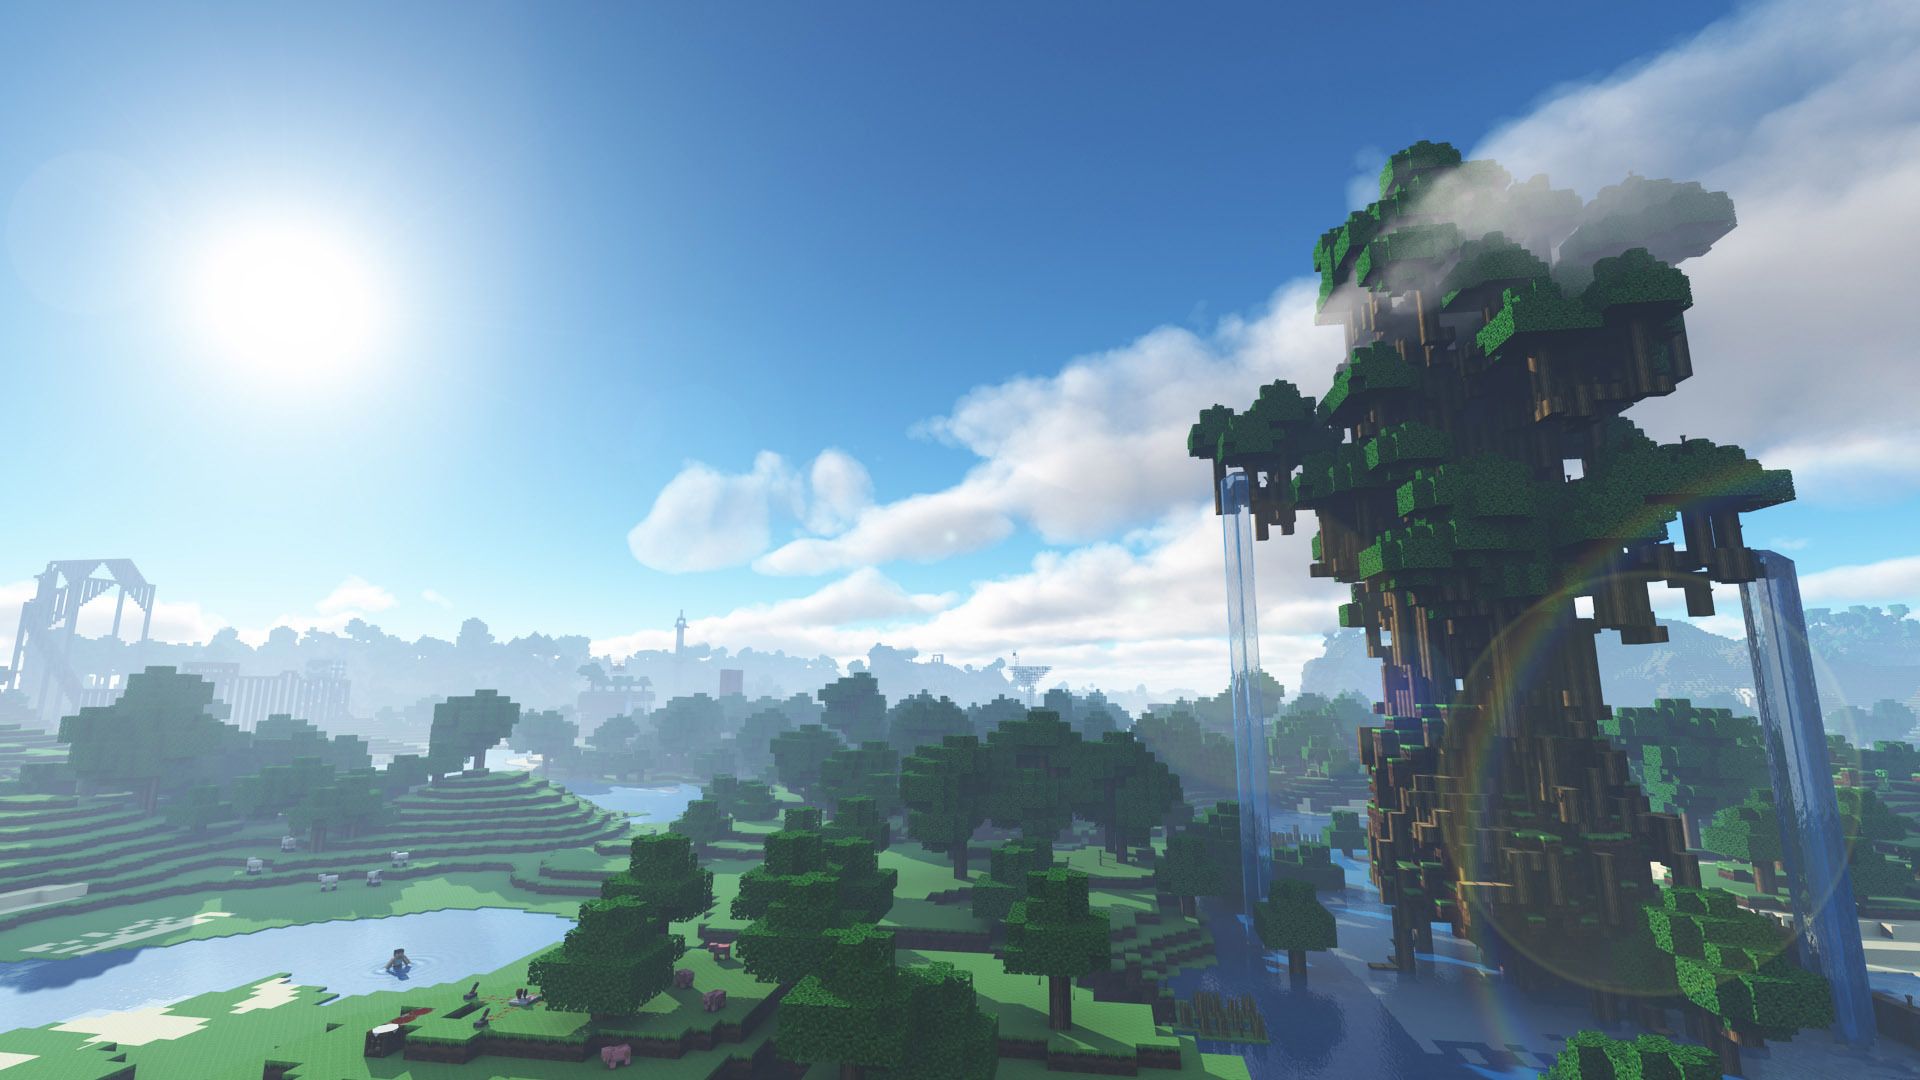 Minecraft Wallpapers Archives - Page 9 of 19 - HD Wide Wallpapers